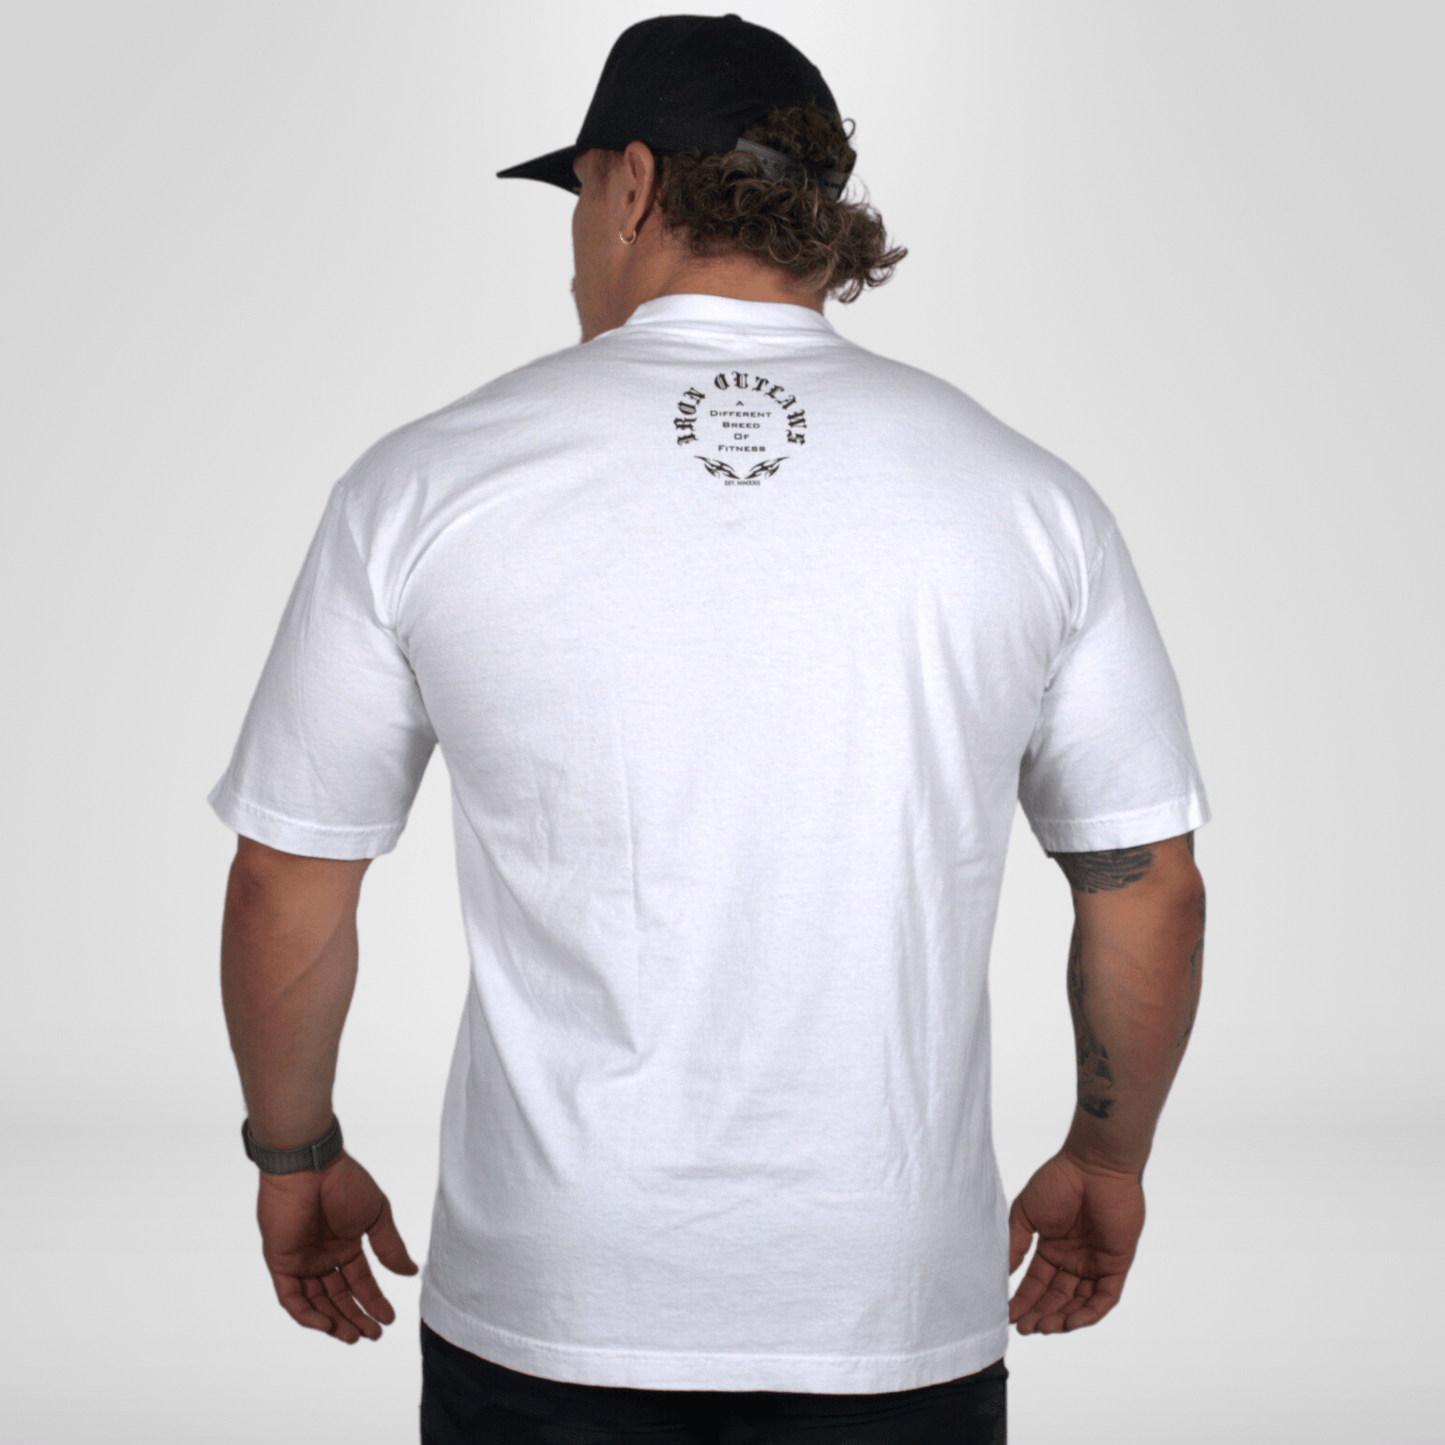 Iron Outlaws Oversize Outlaw Lifting Club Oversize Tee